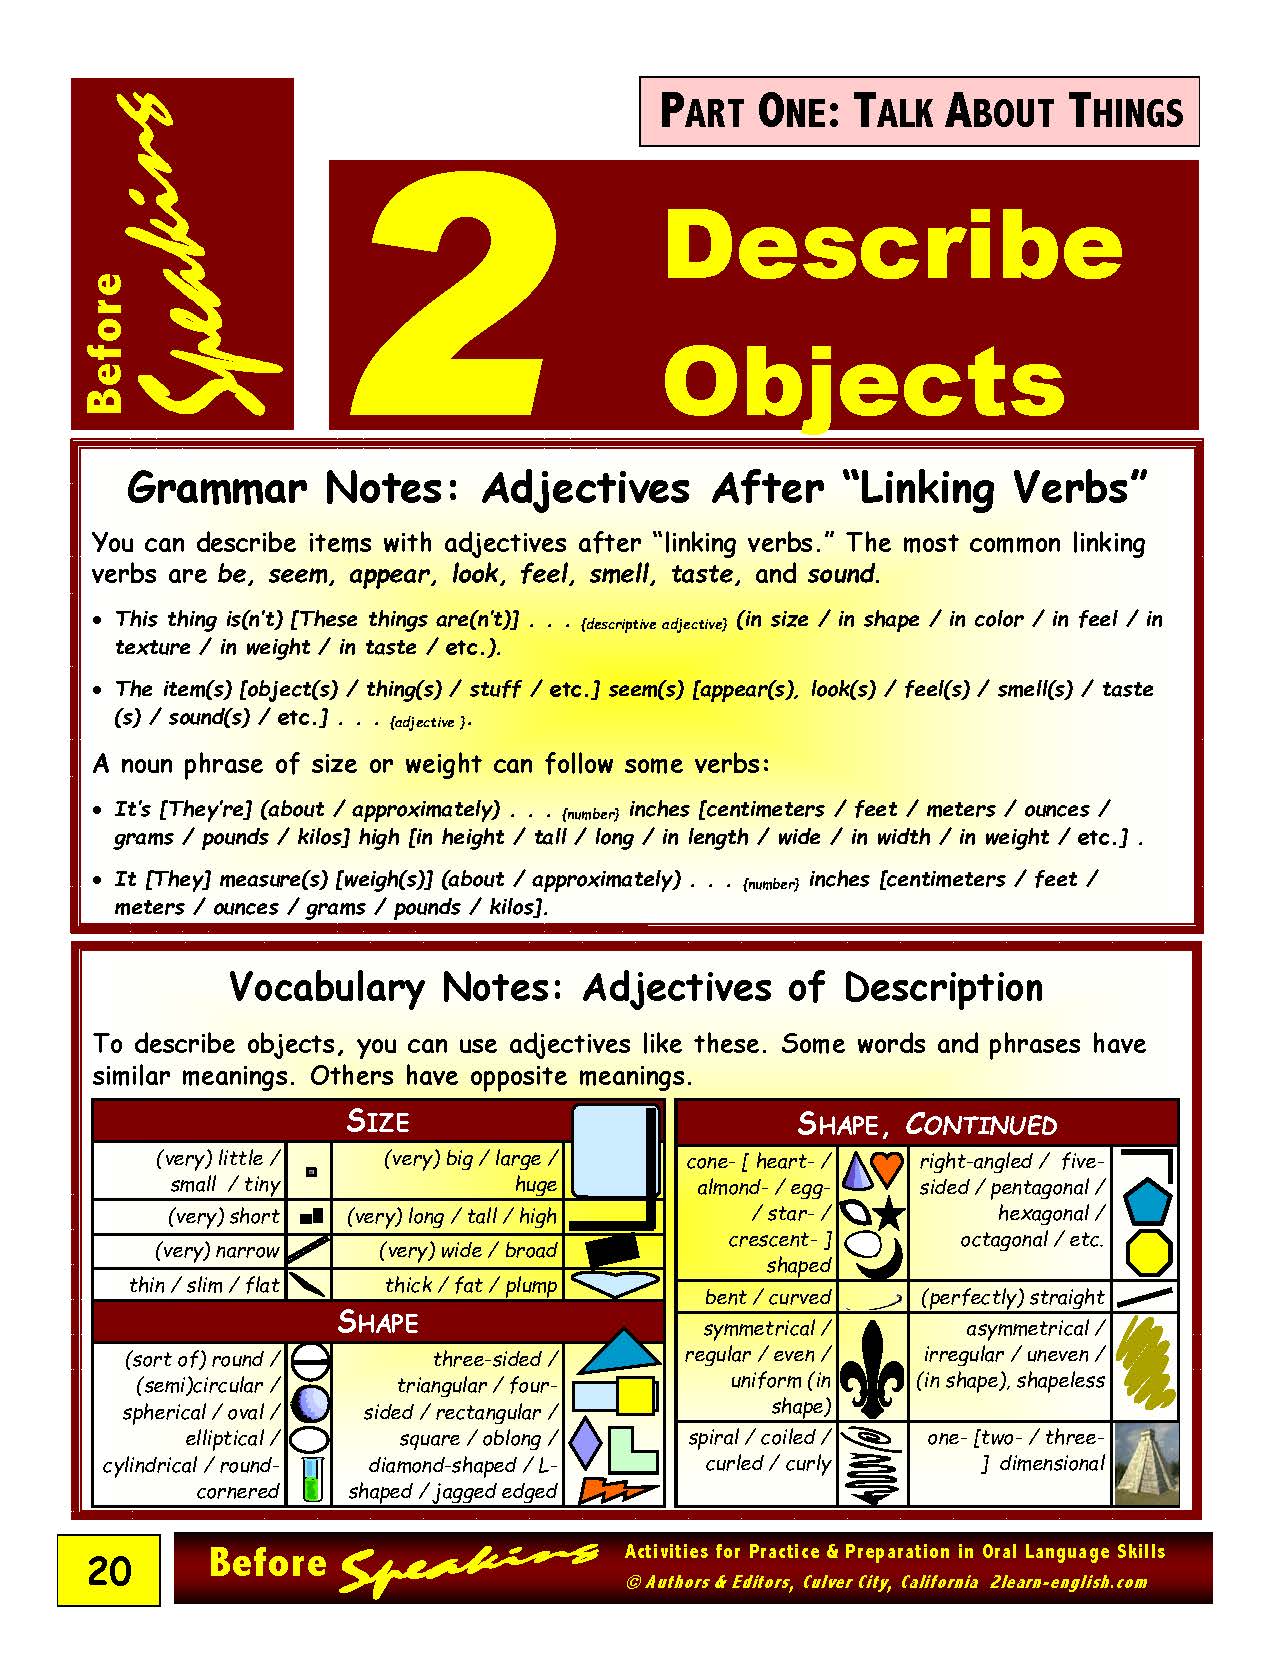 E-01.06 Talk About (Aspects of) Things: Describe Objects; Tell About Their Appearance,  Materials, Parts, & Purposes.